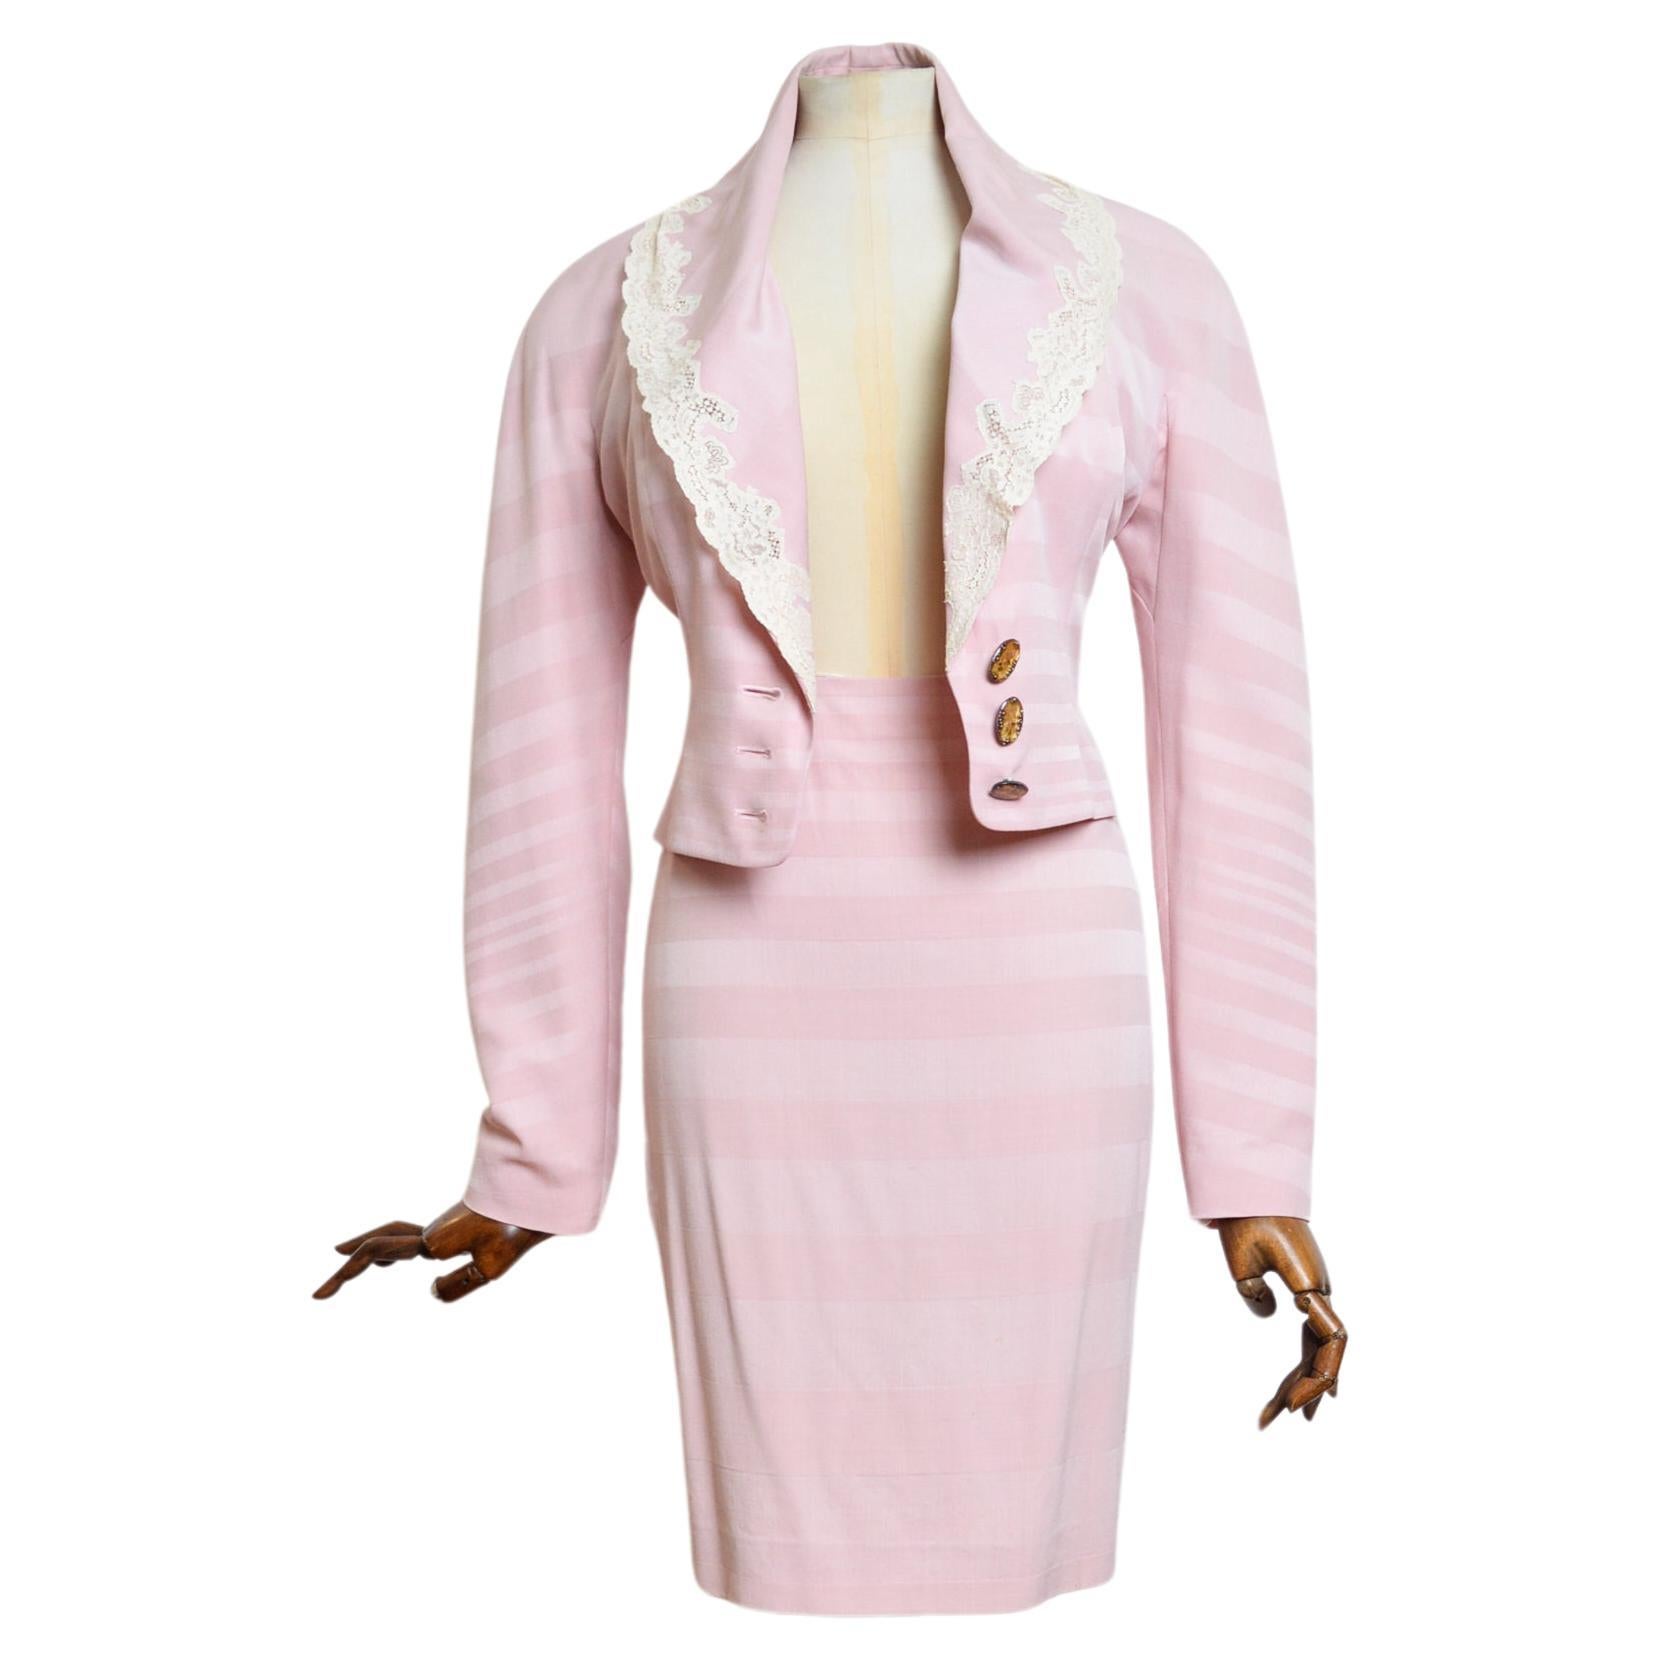 A/W 1999 Christian Dior by John Galliano Pink Lace Jacket & Pencil Skirt set For Sale